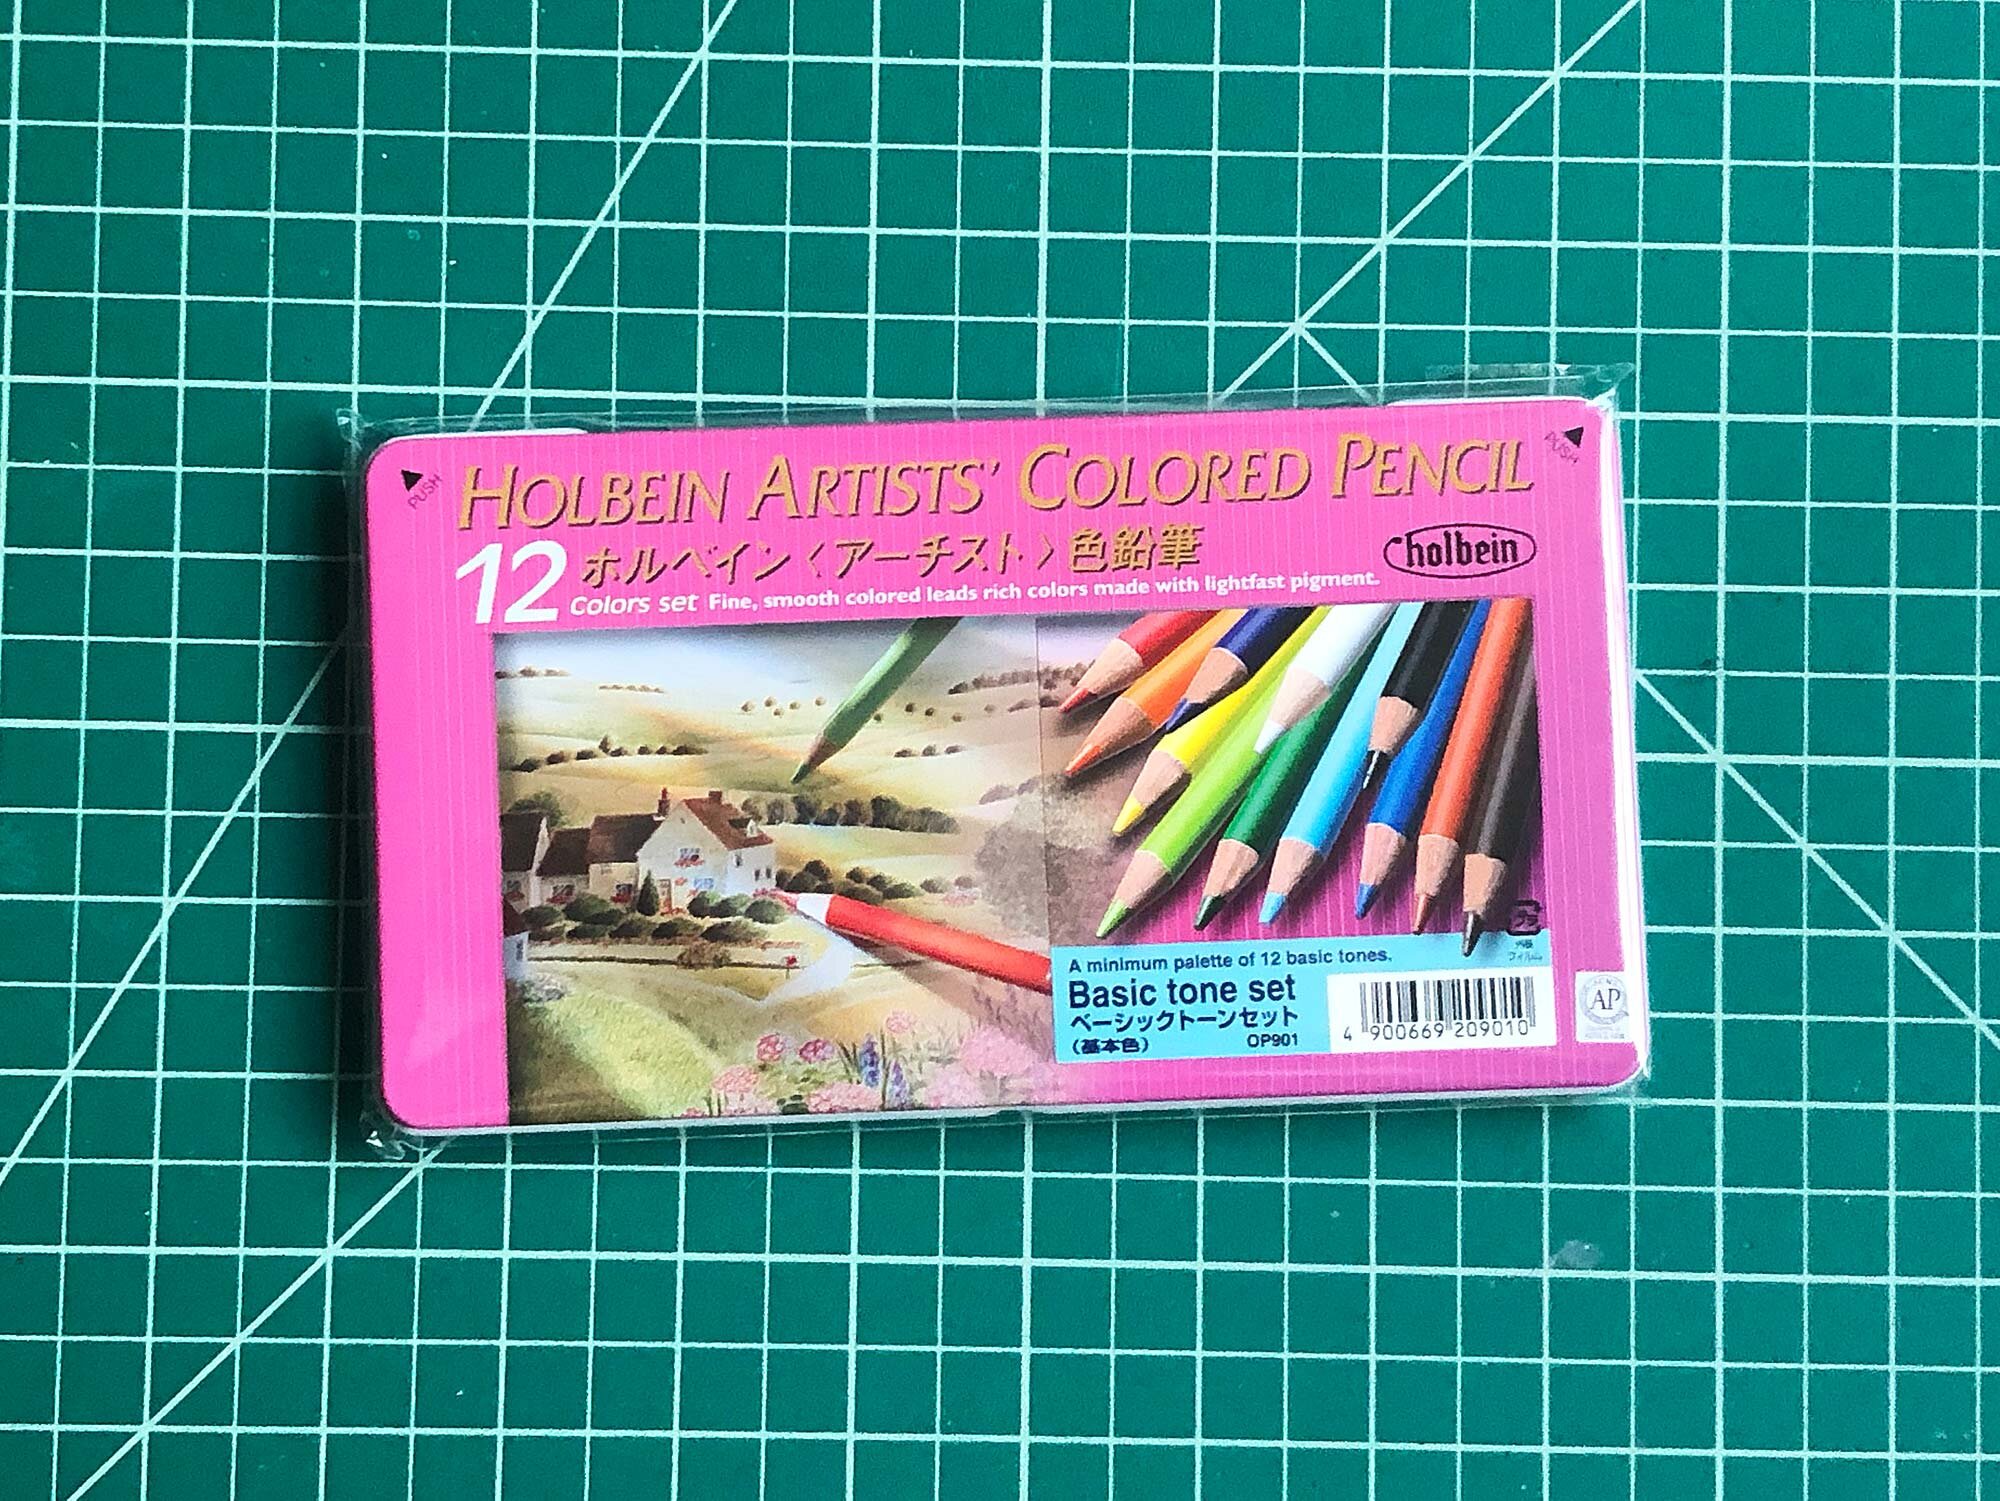 A pastel dream: Holbein artist colored pencils